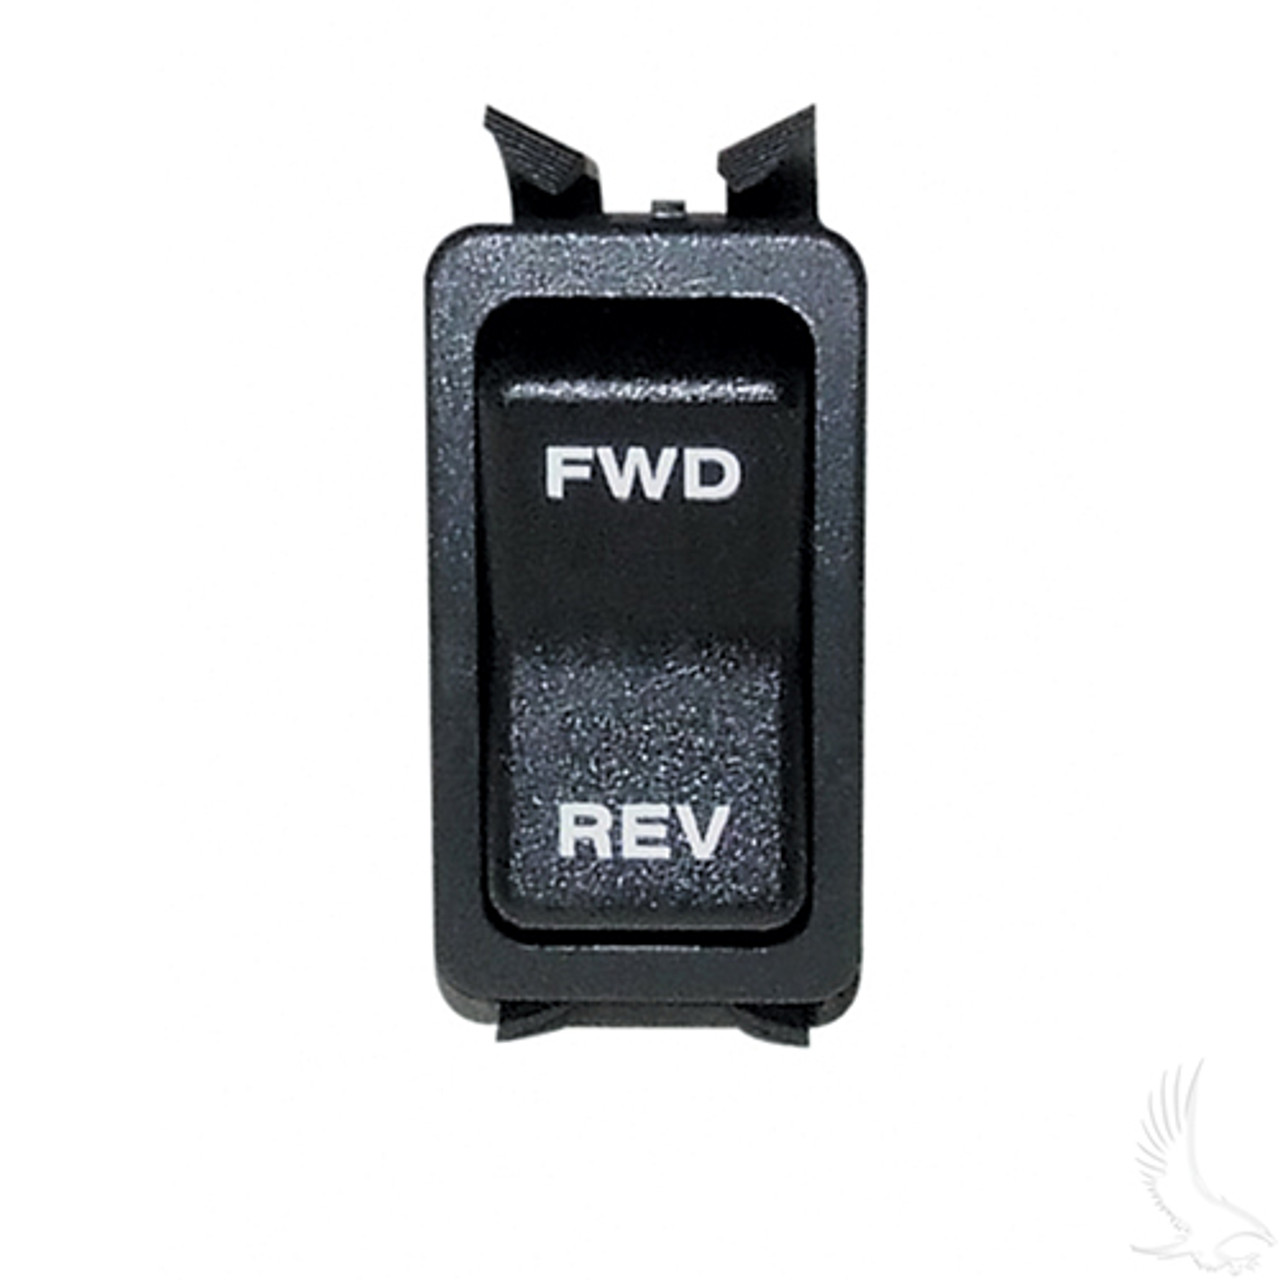 Forward/Reverse Switch Assembly for EZGO TXT PDS (2003-Up), FR-017, 74323G01, 9640